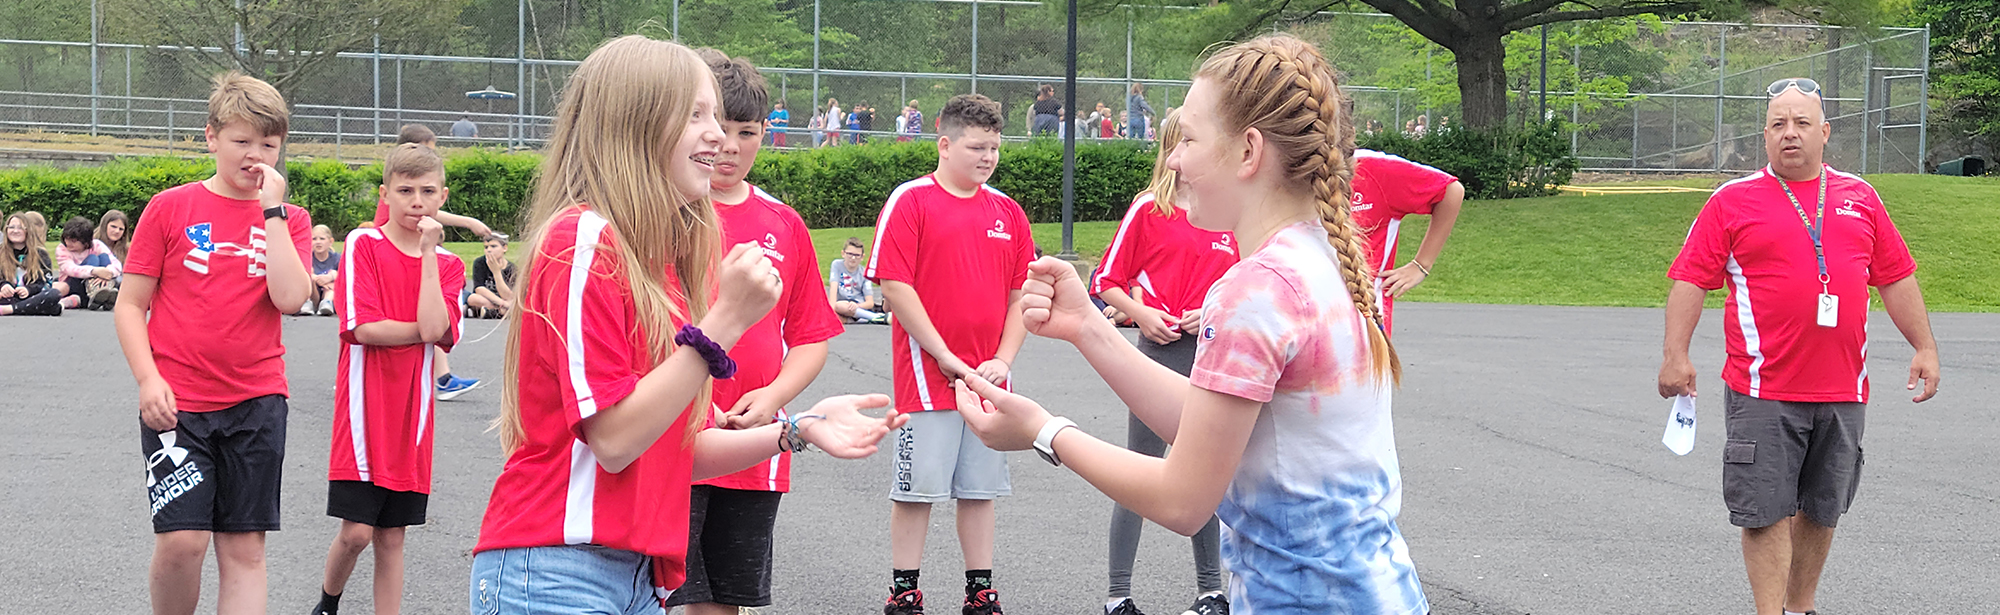 elementary students playing a hand clapping game at field day